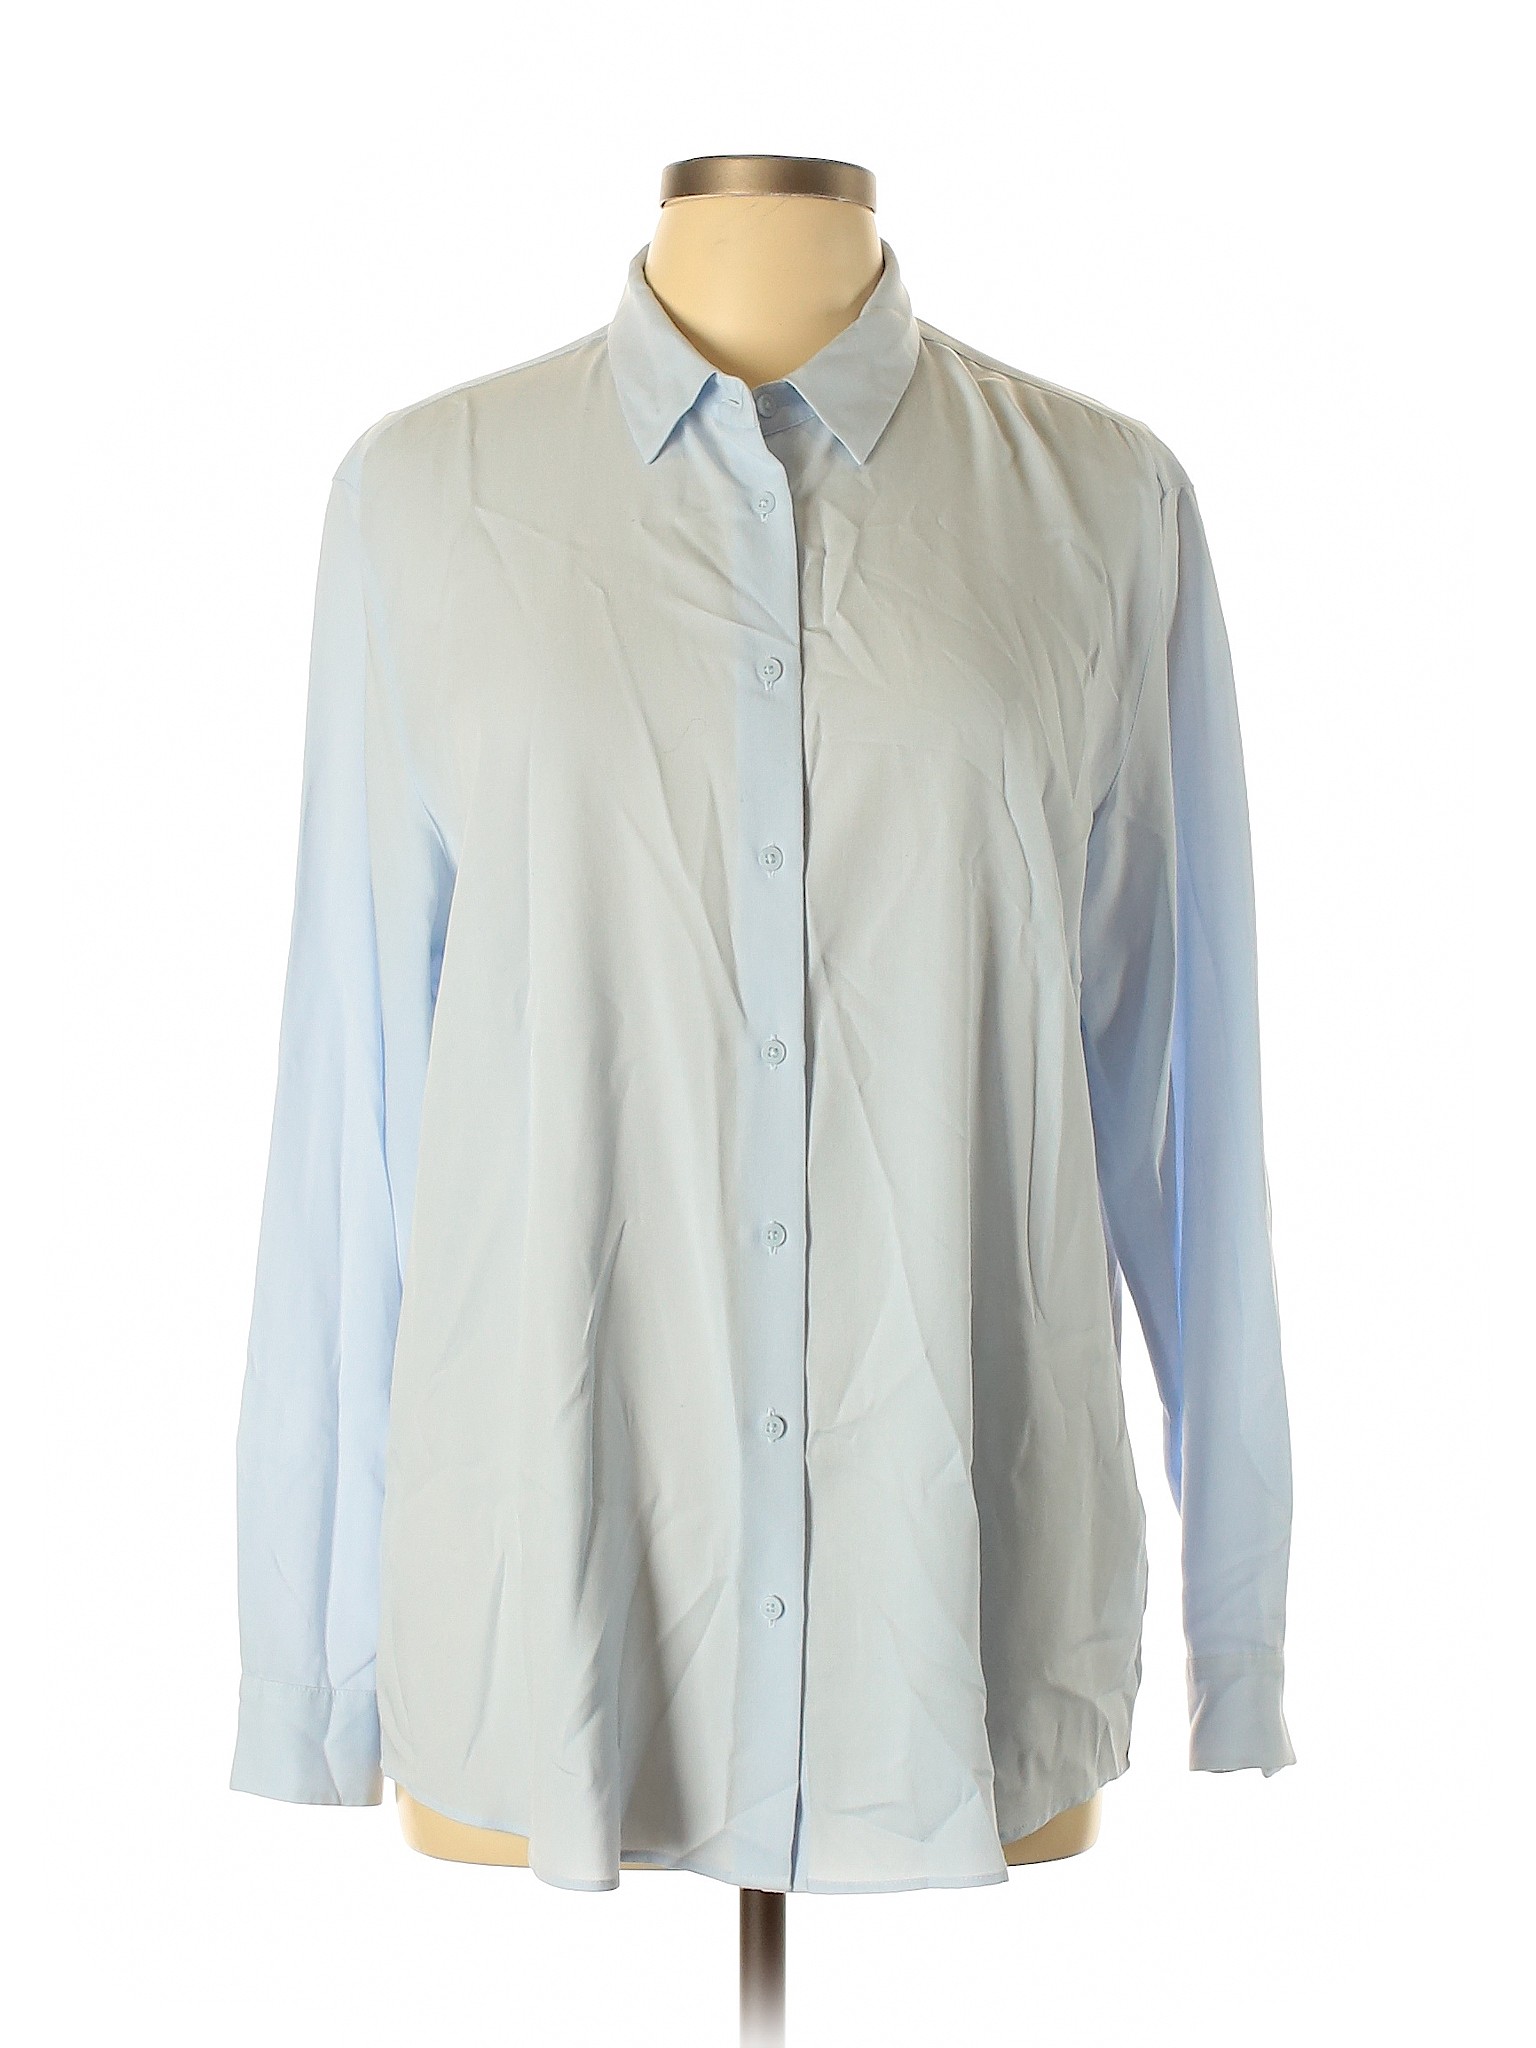 Uniqlo Solid Blue Long Sleeve Button-Down Shirt Size XL - 77% off | thredUP